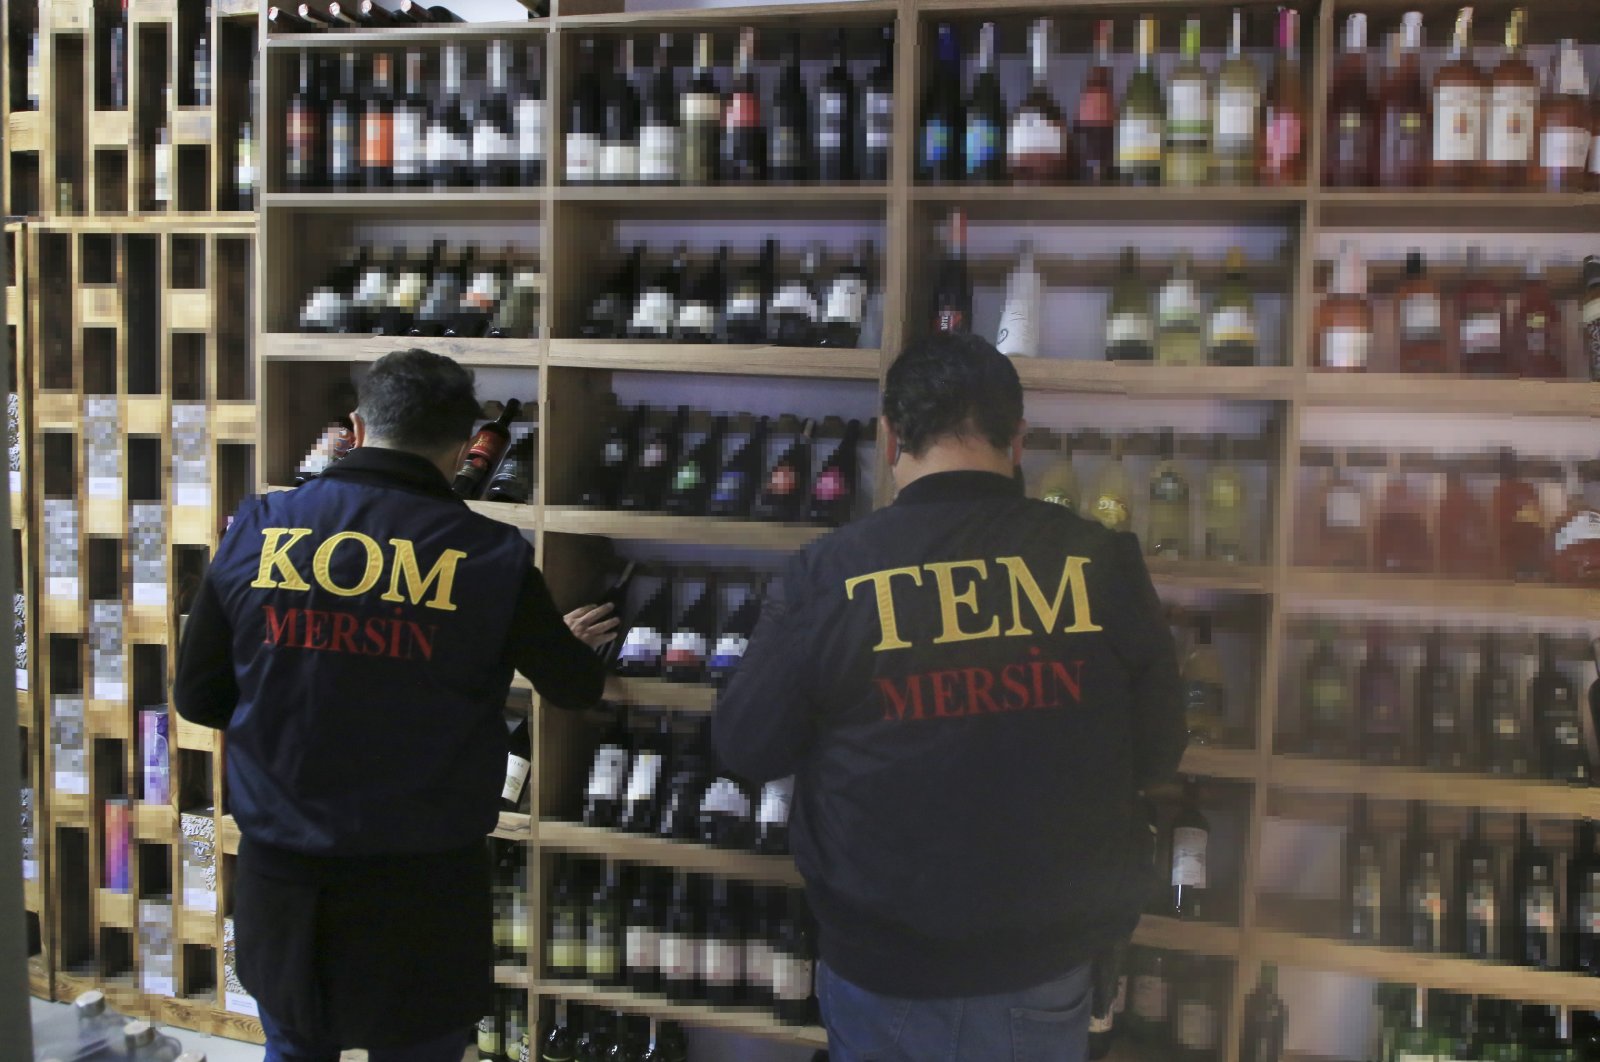 Police officers check drinks at a shop during an inspection against bootleg alcohol, in Mersin, southern Turkey, Dec. 29, 2021. (AA Photo)